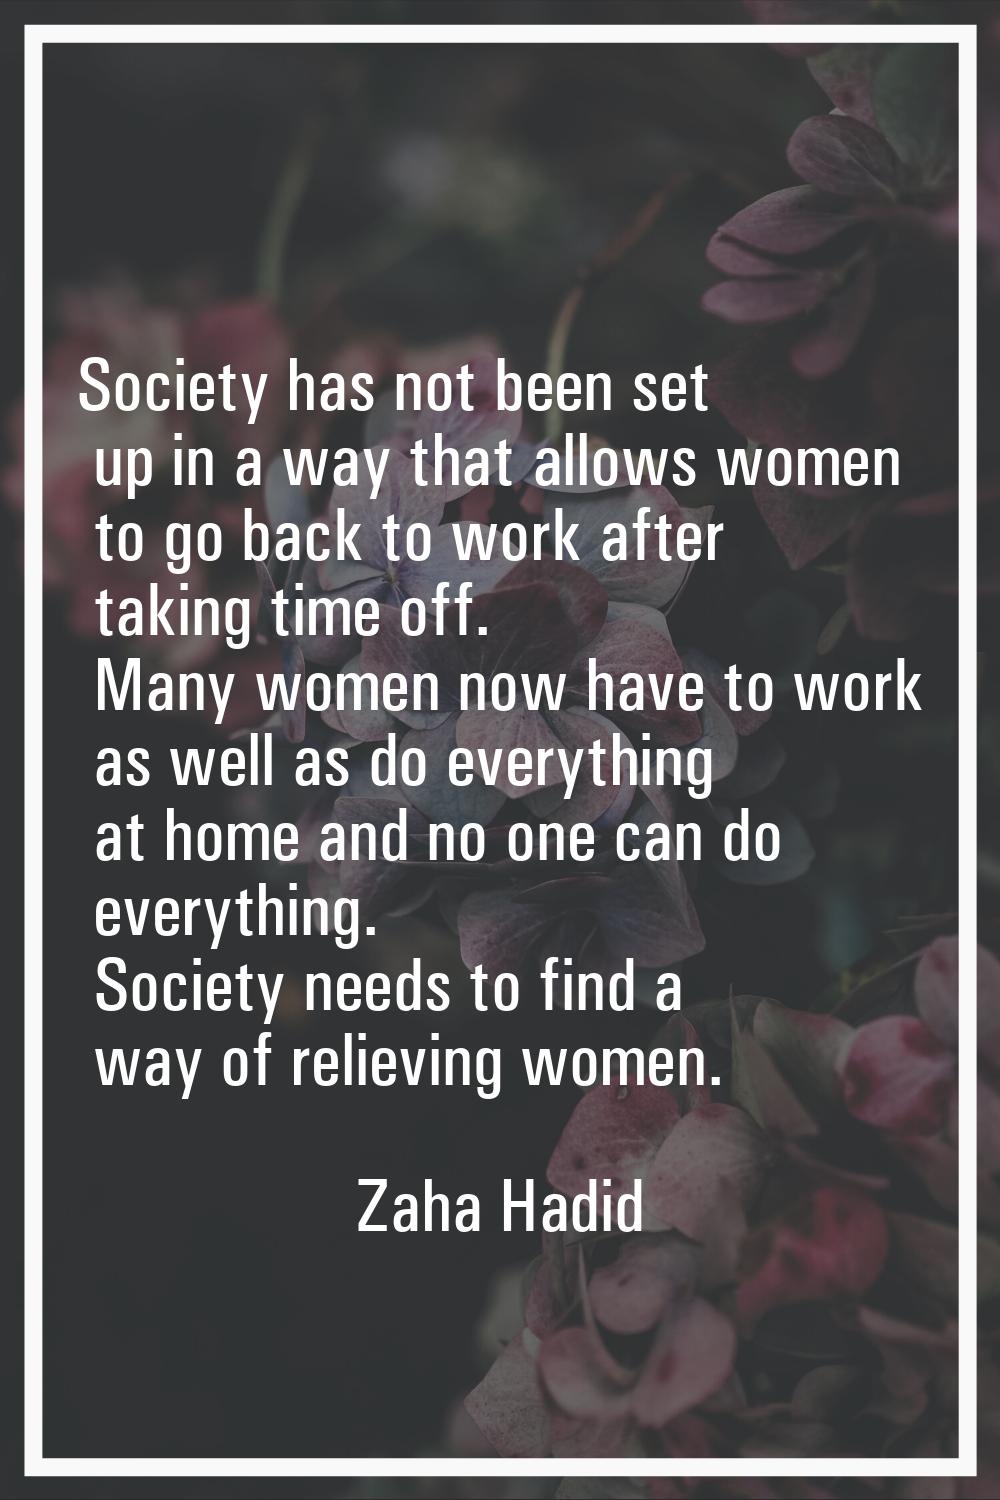 Society has not been set up in a way that allows women to go back to work after taking time off. Ma